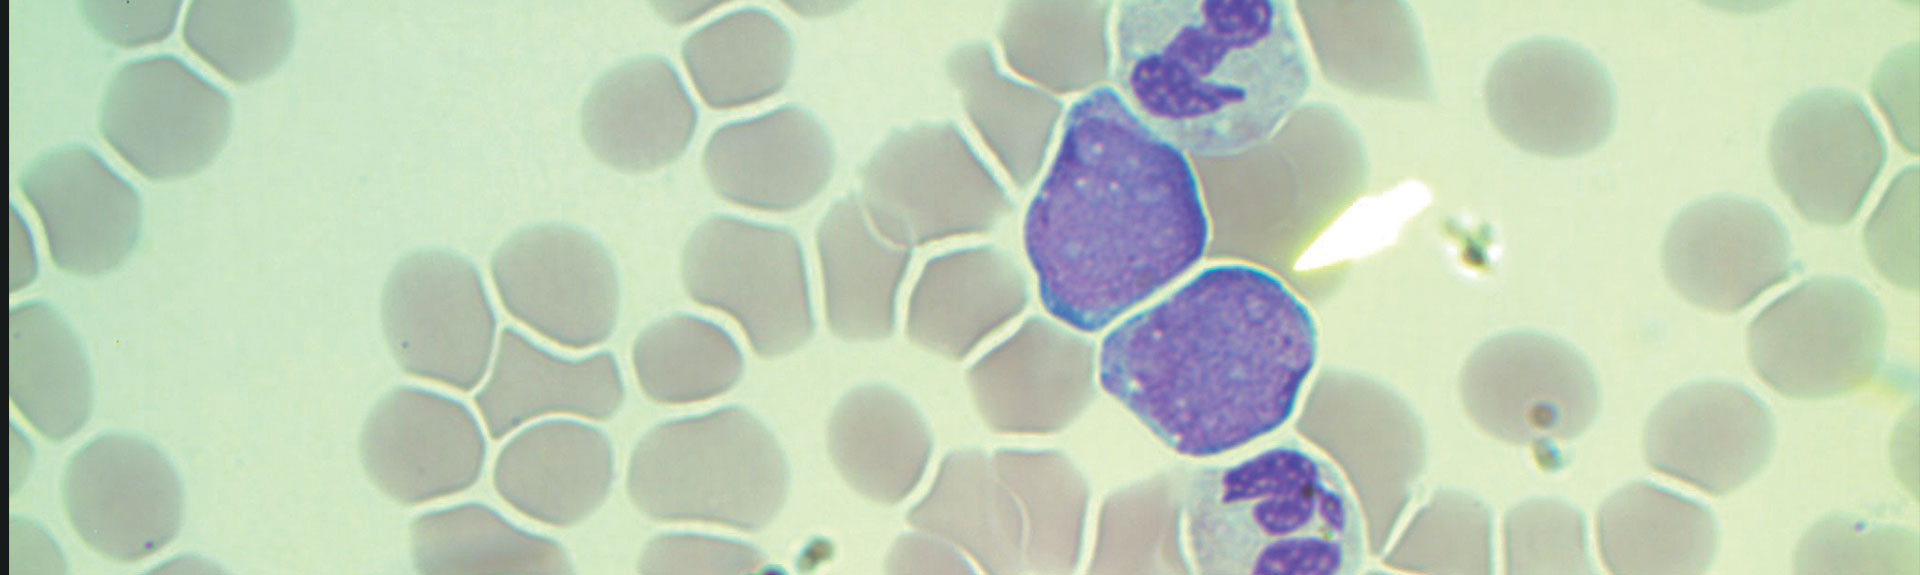 An image of the peripheral blood smear shows four blasts: very large cells with a large immature purple nucleus and small rim of blue cytoplasm.